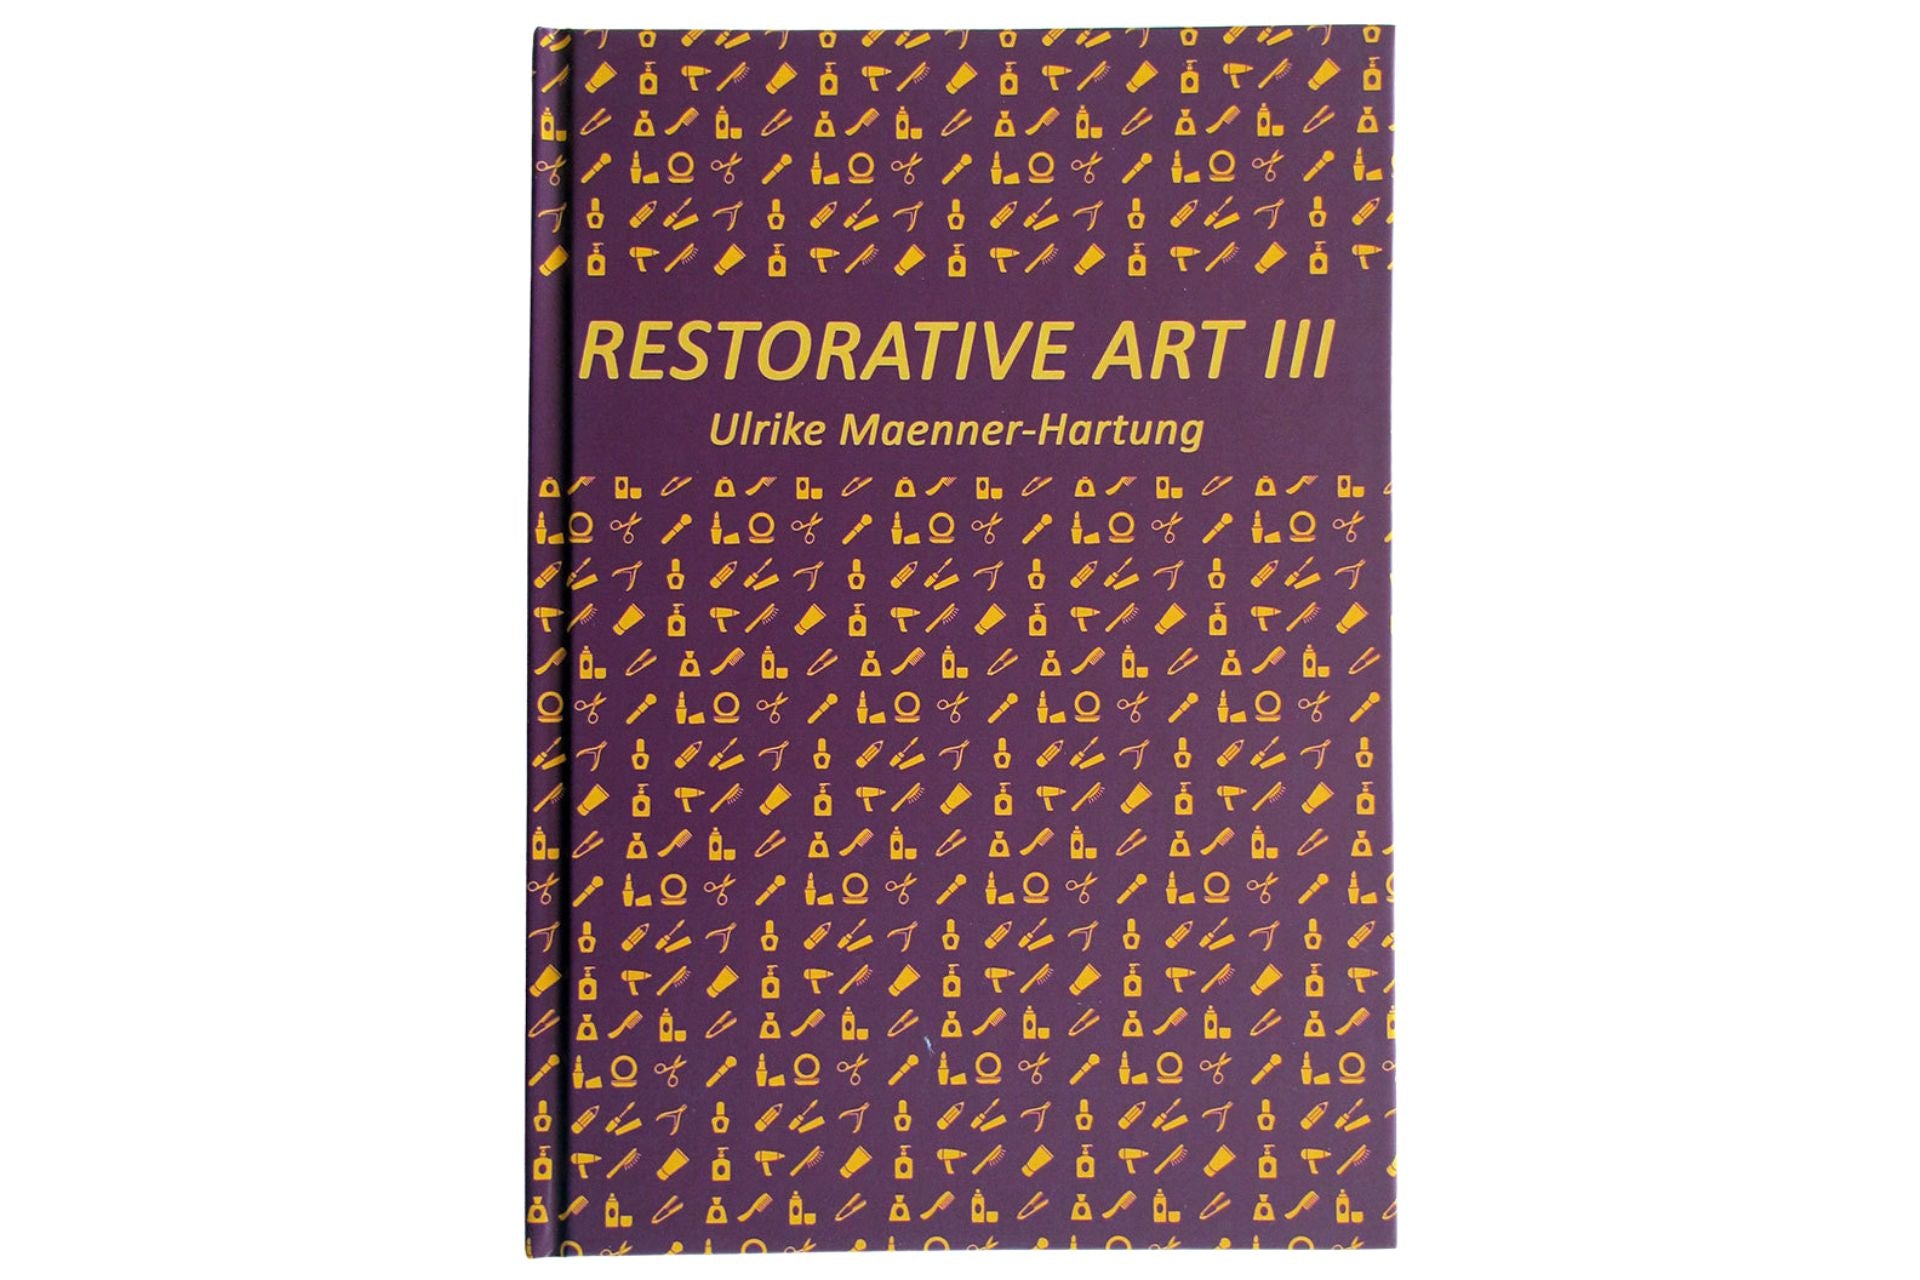 Book "Restorative Art", 50 pages, 2017 edition